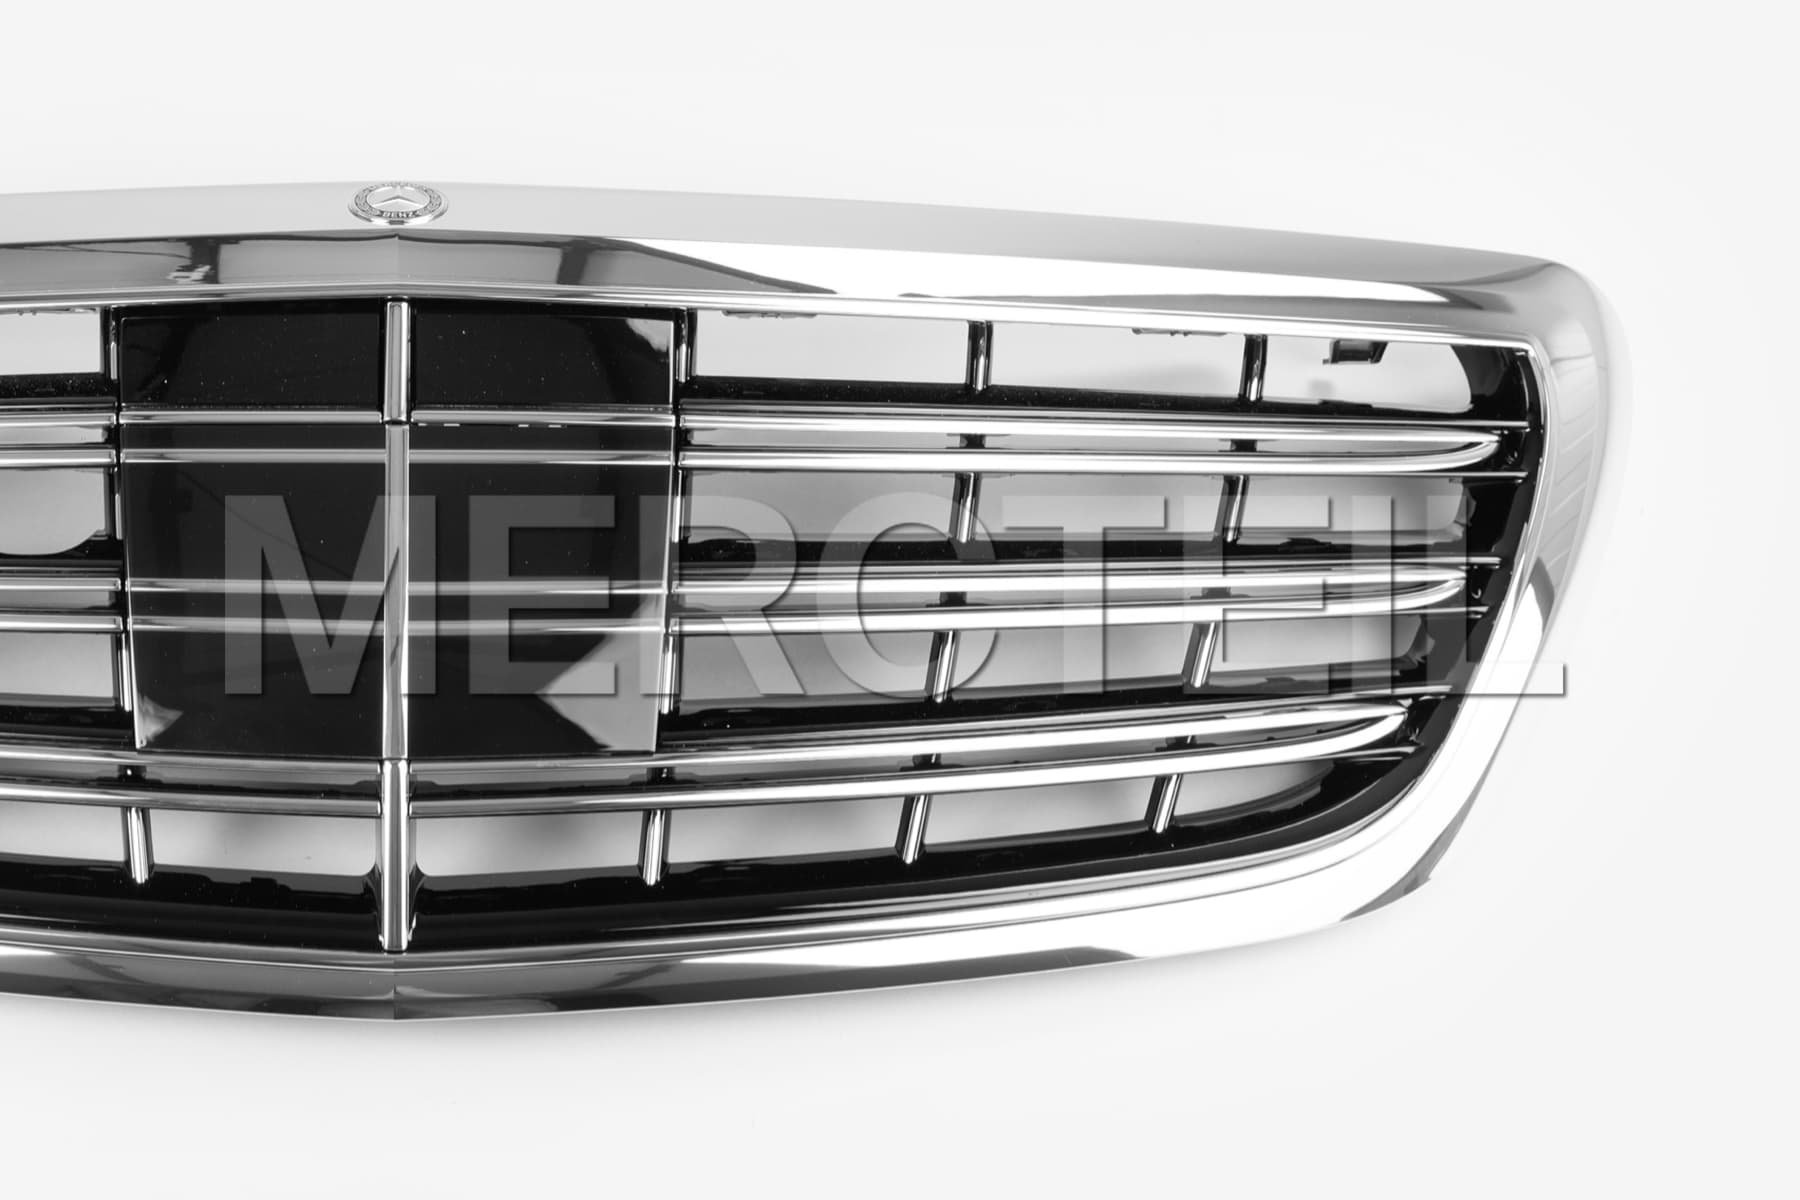 Maybach/S600 Radiator Grille (Double Lamella) for S-Class (part number: A22288017839040)